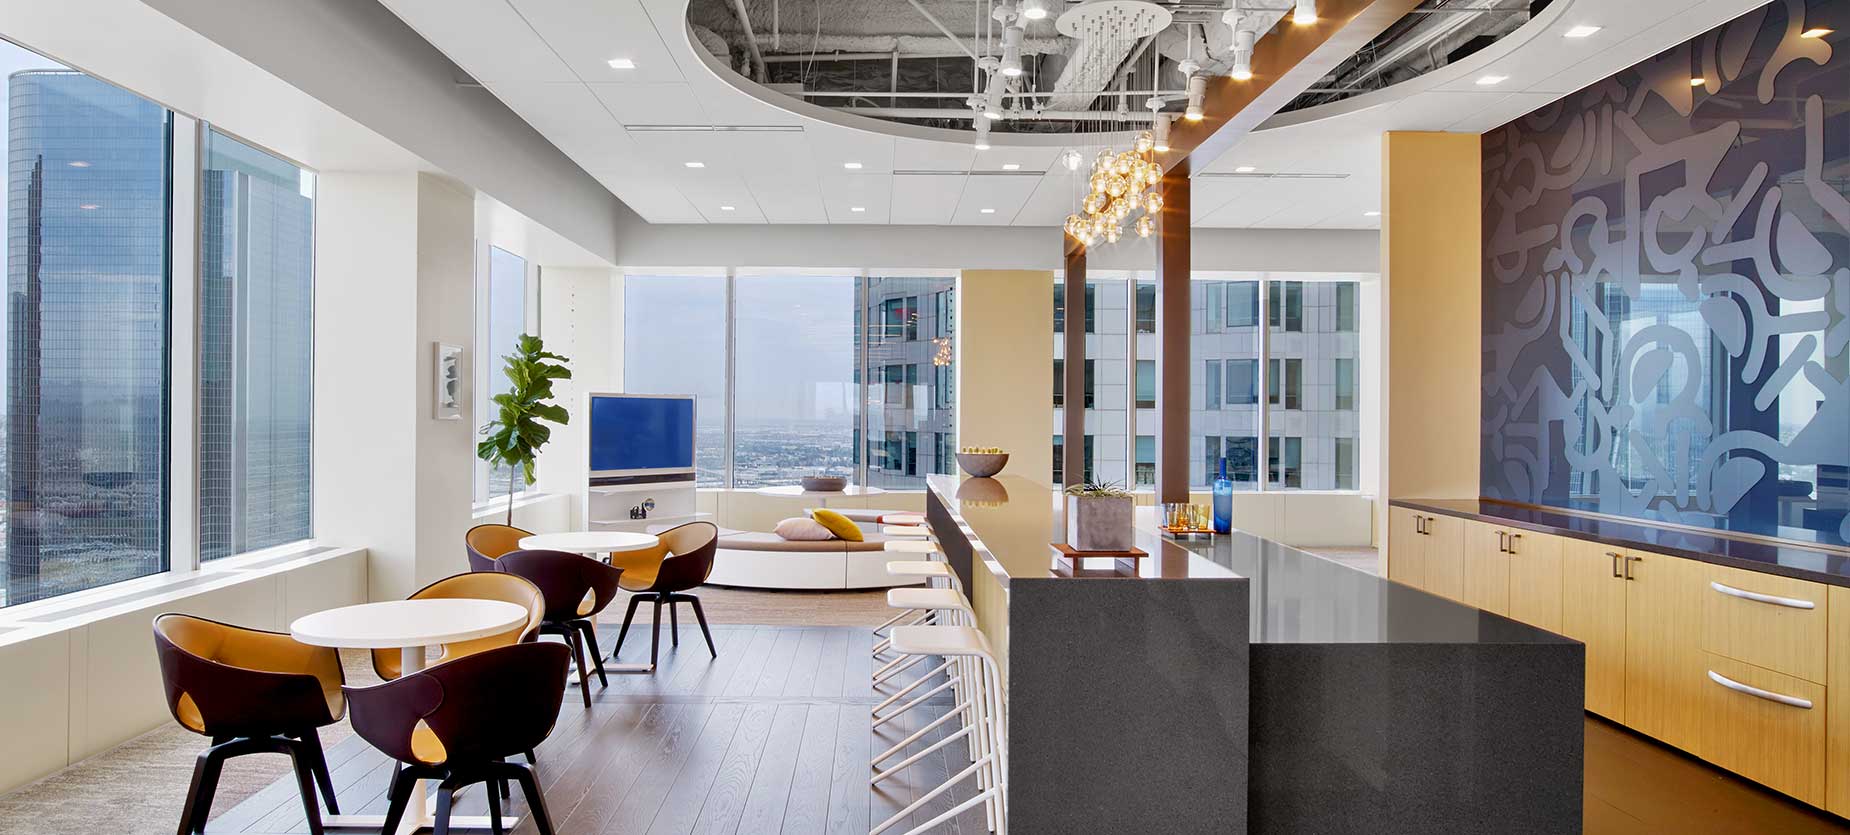 This cafe creates a Social Space that provides comfortable seating to encourage interaction and collaboration with various postures. Haworth Collection furniture, paired with access to surrounding views to the outside help elevate this space and make it a comfortable place to connect with others.